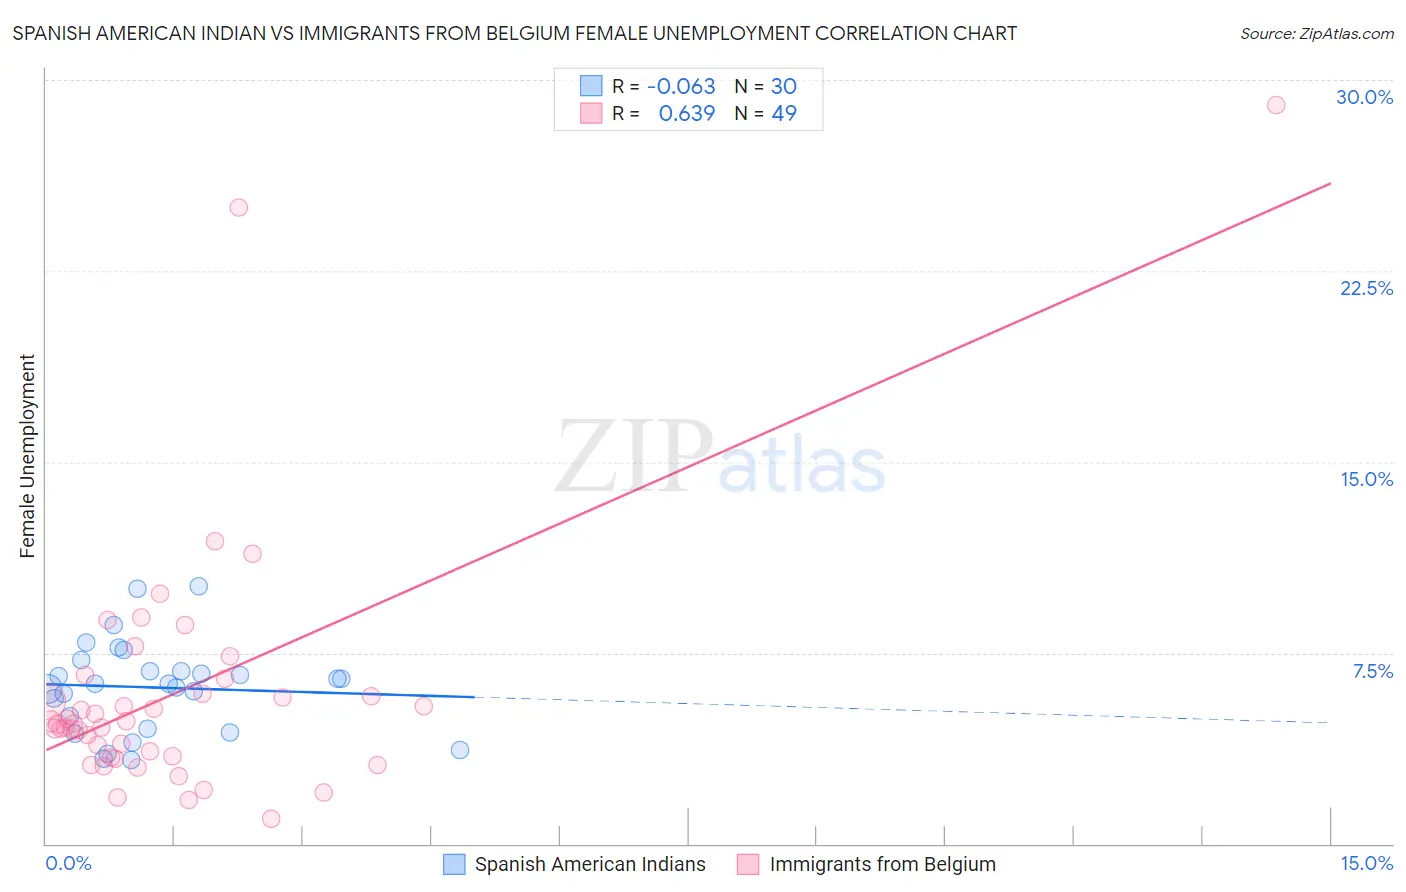 Spanish American Indian vs Immigrants from Belgium Female Unemployment